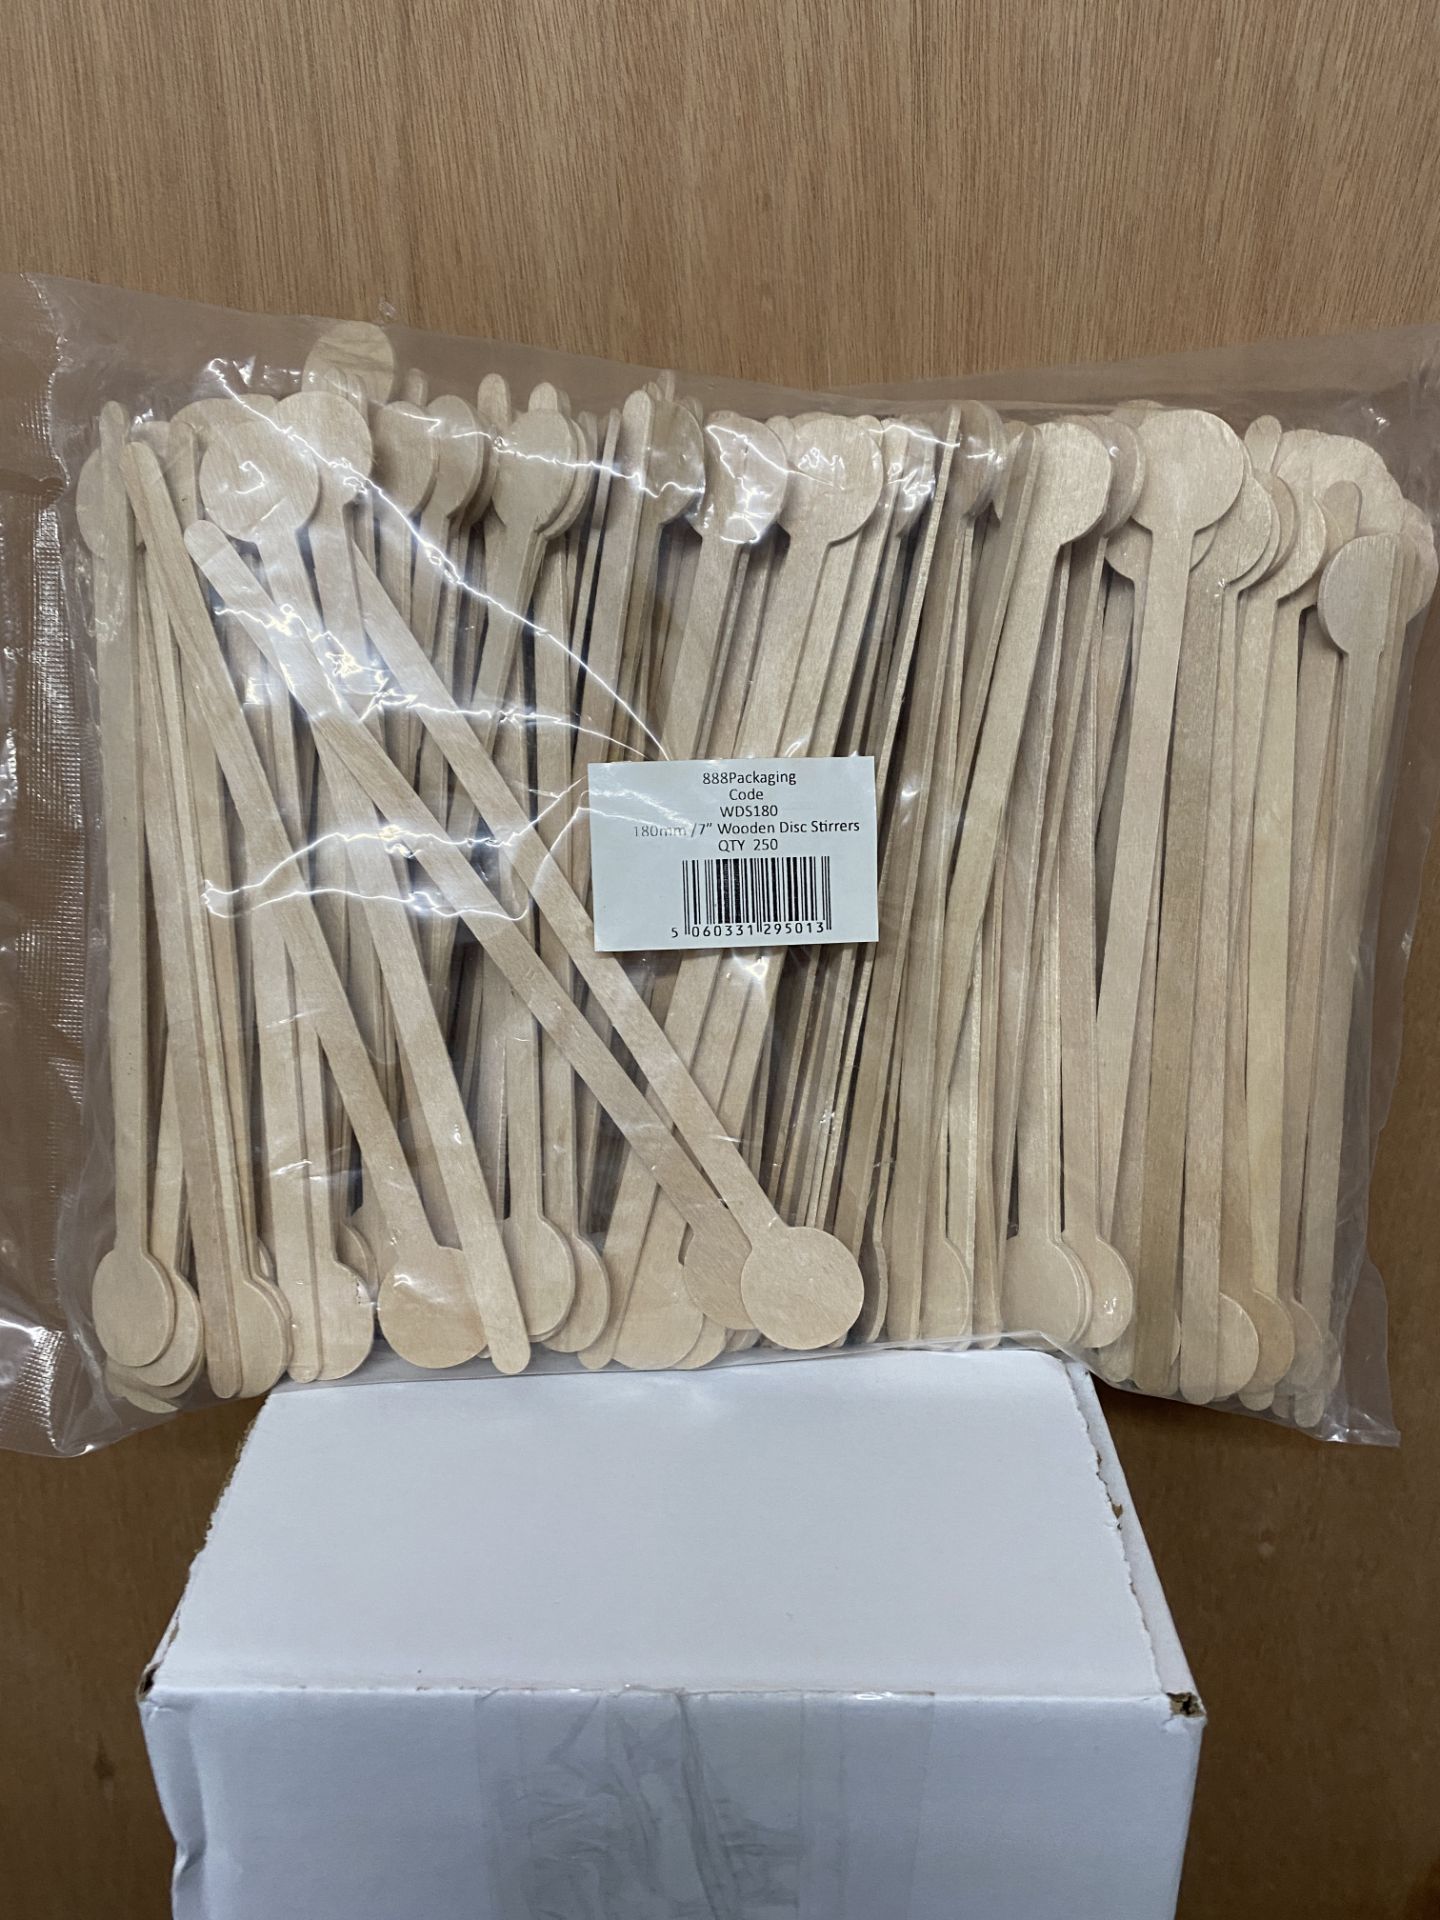 5 x Boxes of 2,000 Wooden Disc Stirrers by 888 Gastro Disposables - Image 2 of 2